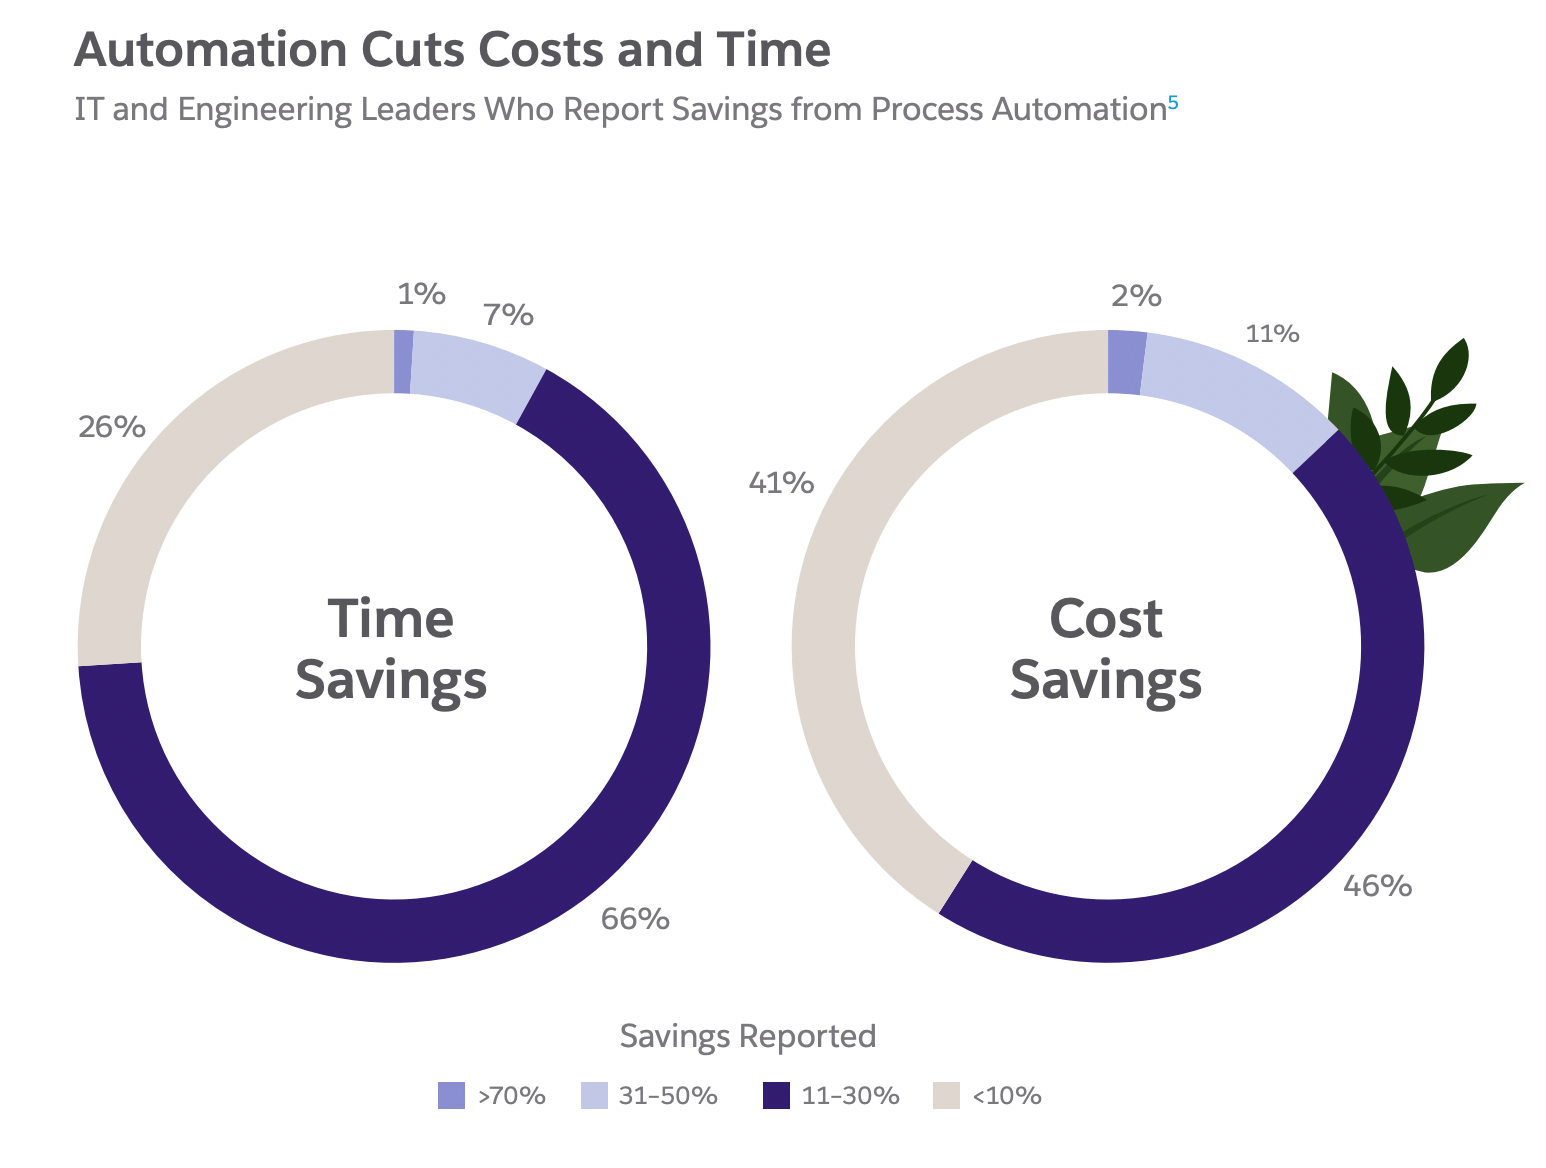 Technical leaders who report time and cost savings with automation